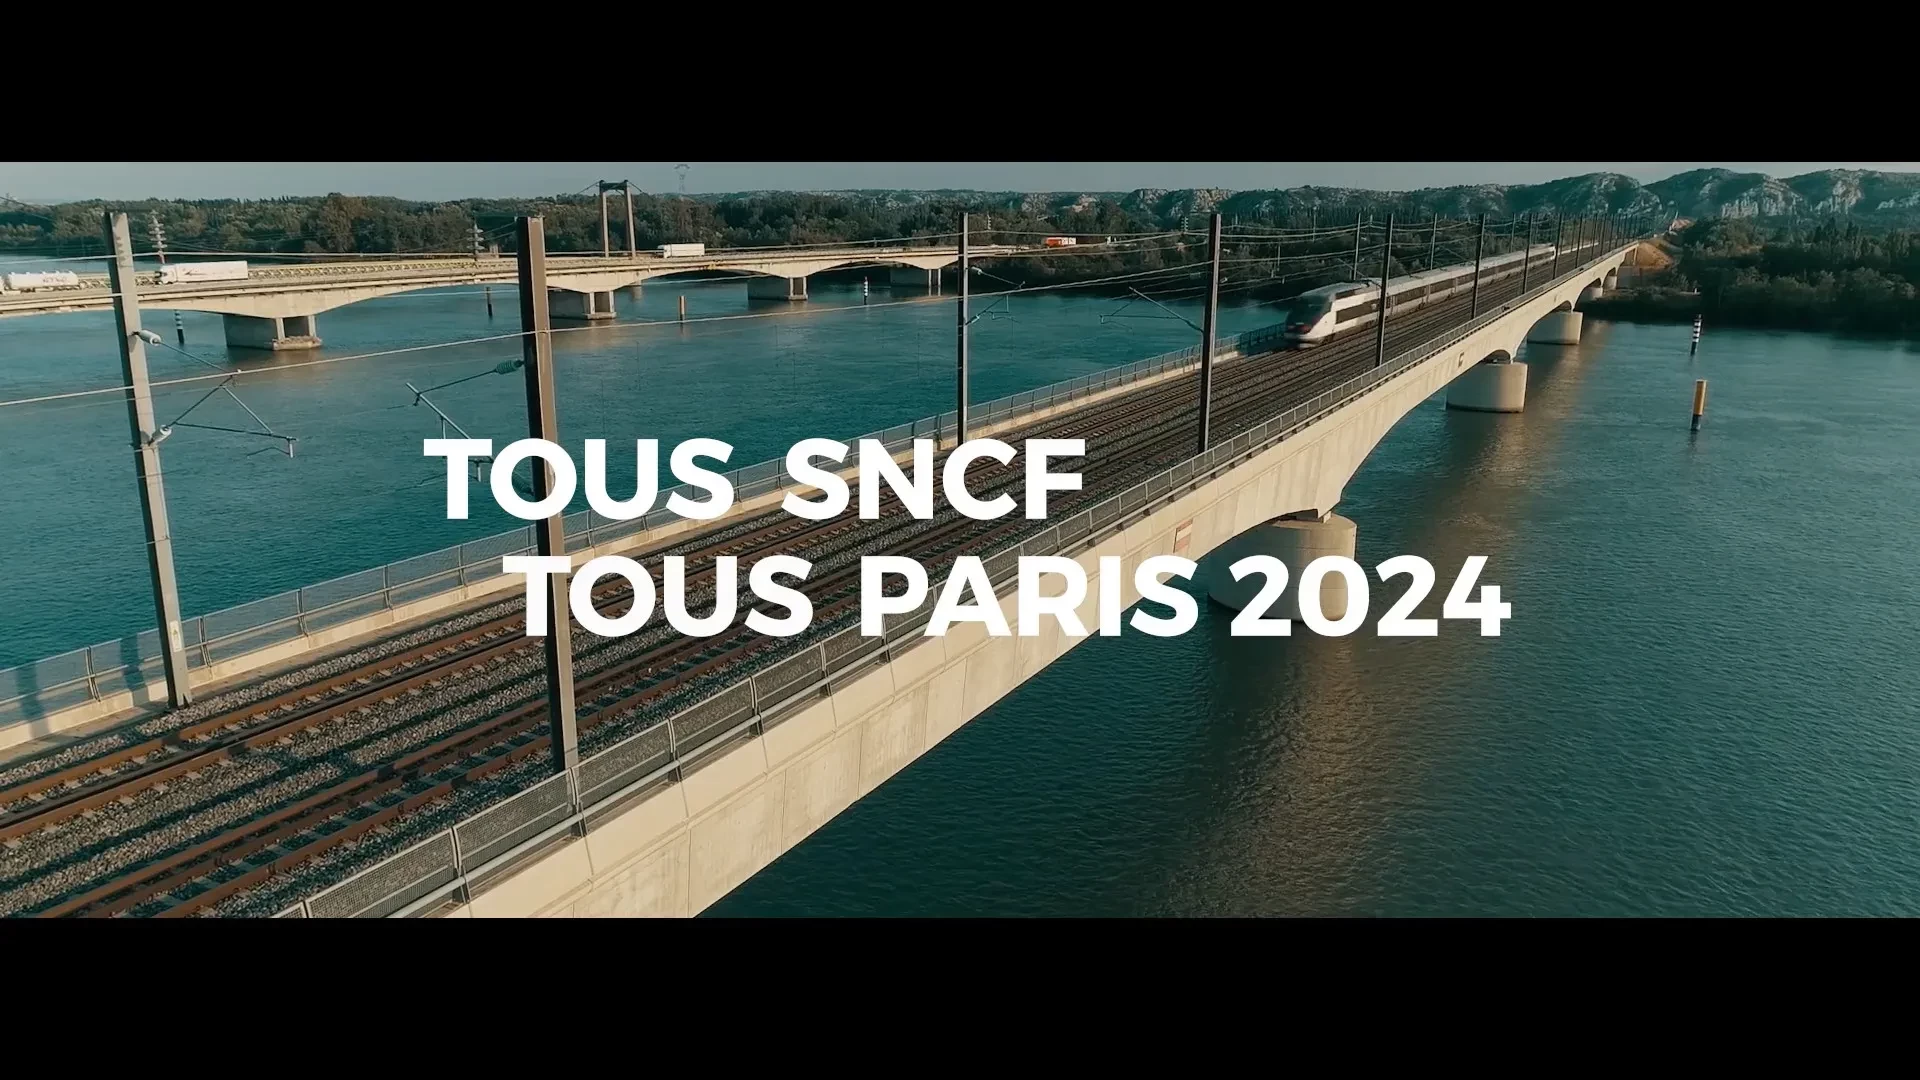 SNCF Voyageurs are set to provide transport for teams and officials to outlying venues at Paris 2024 ©SNCF